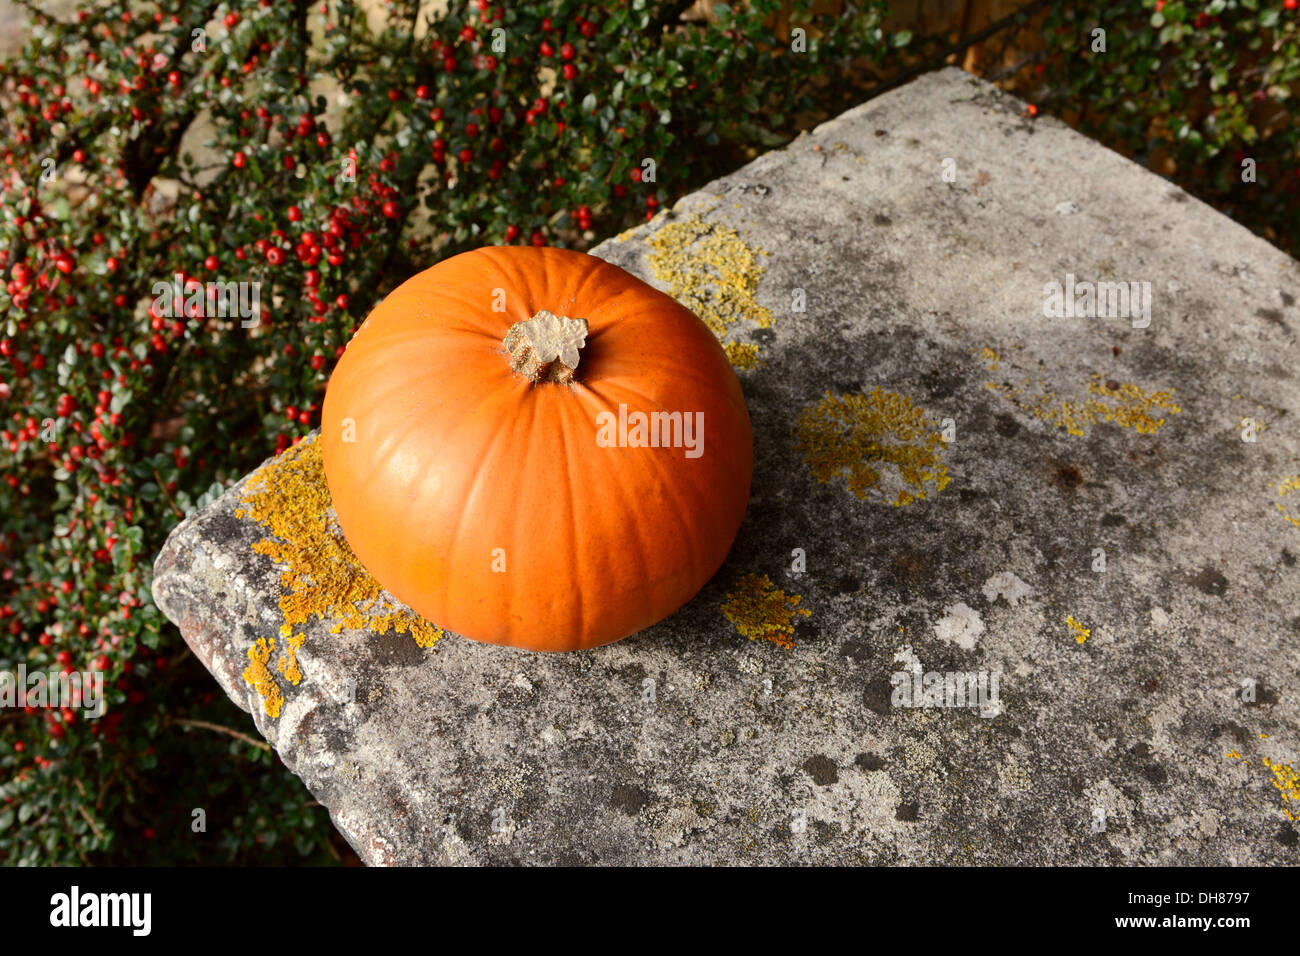 Small orange pumpkin on a stone bench with background of red cotoneaster berries Stock Photo